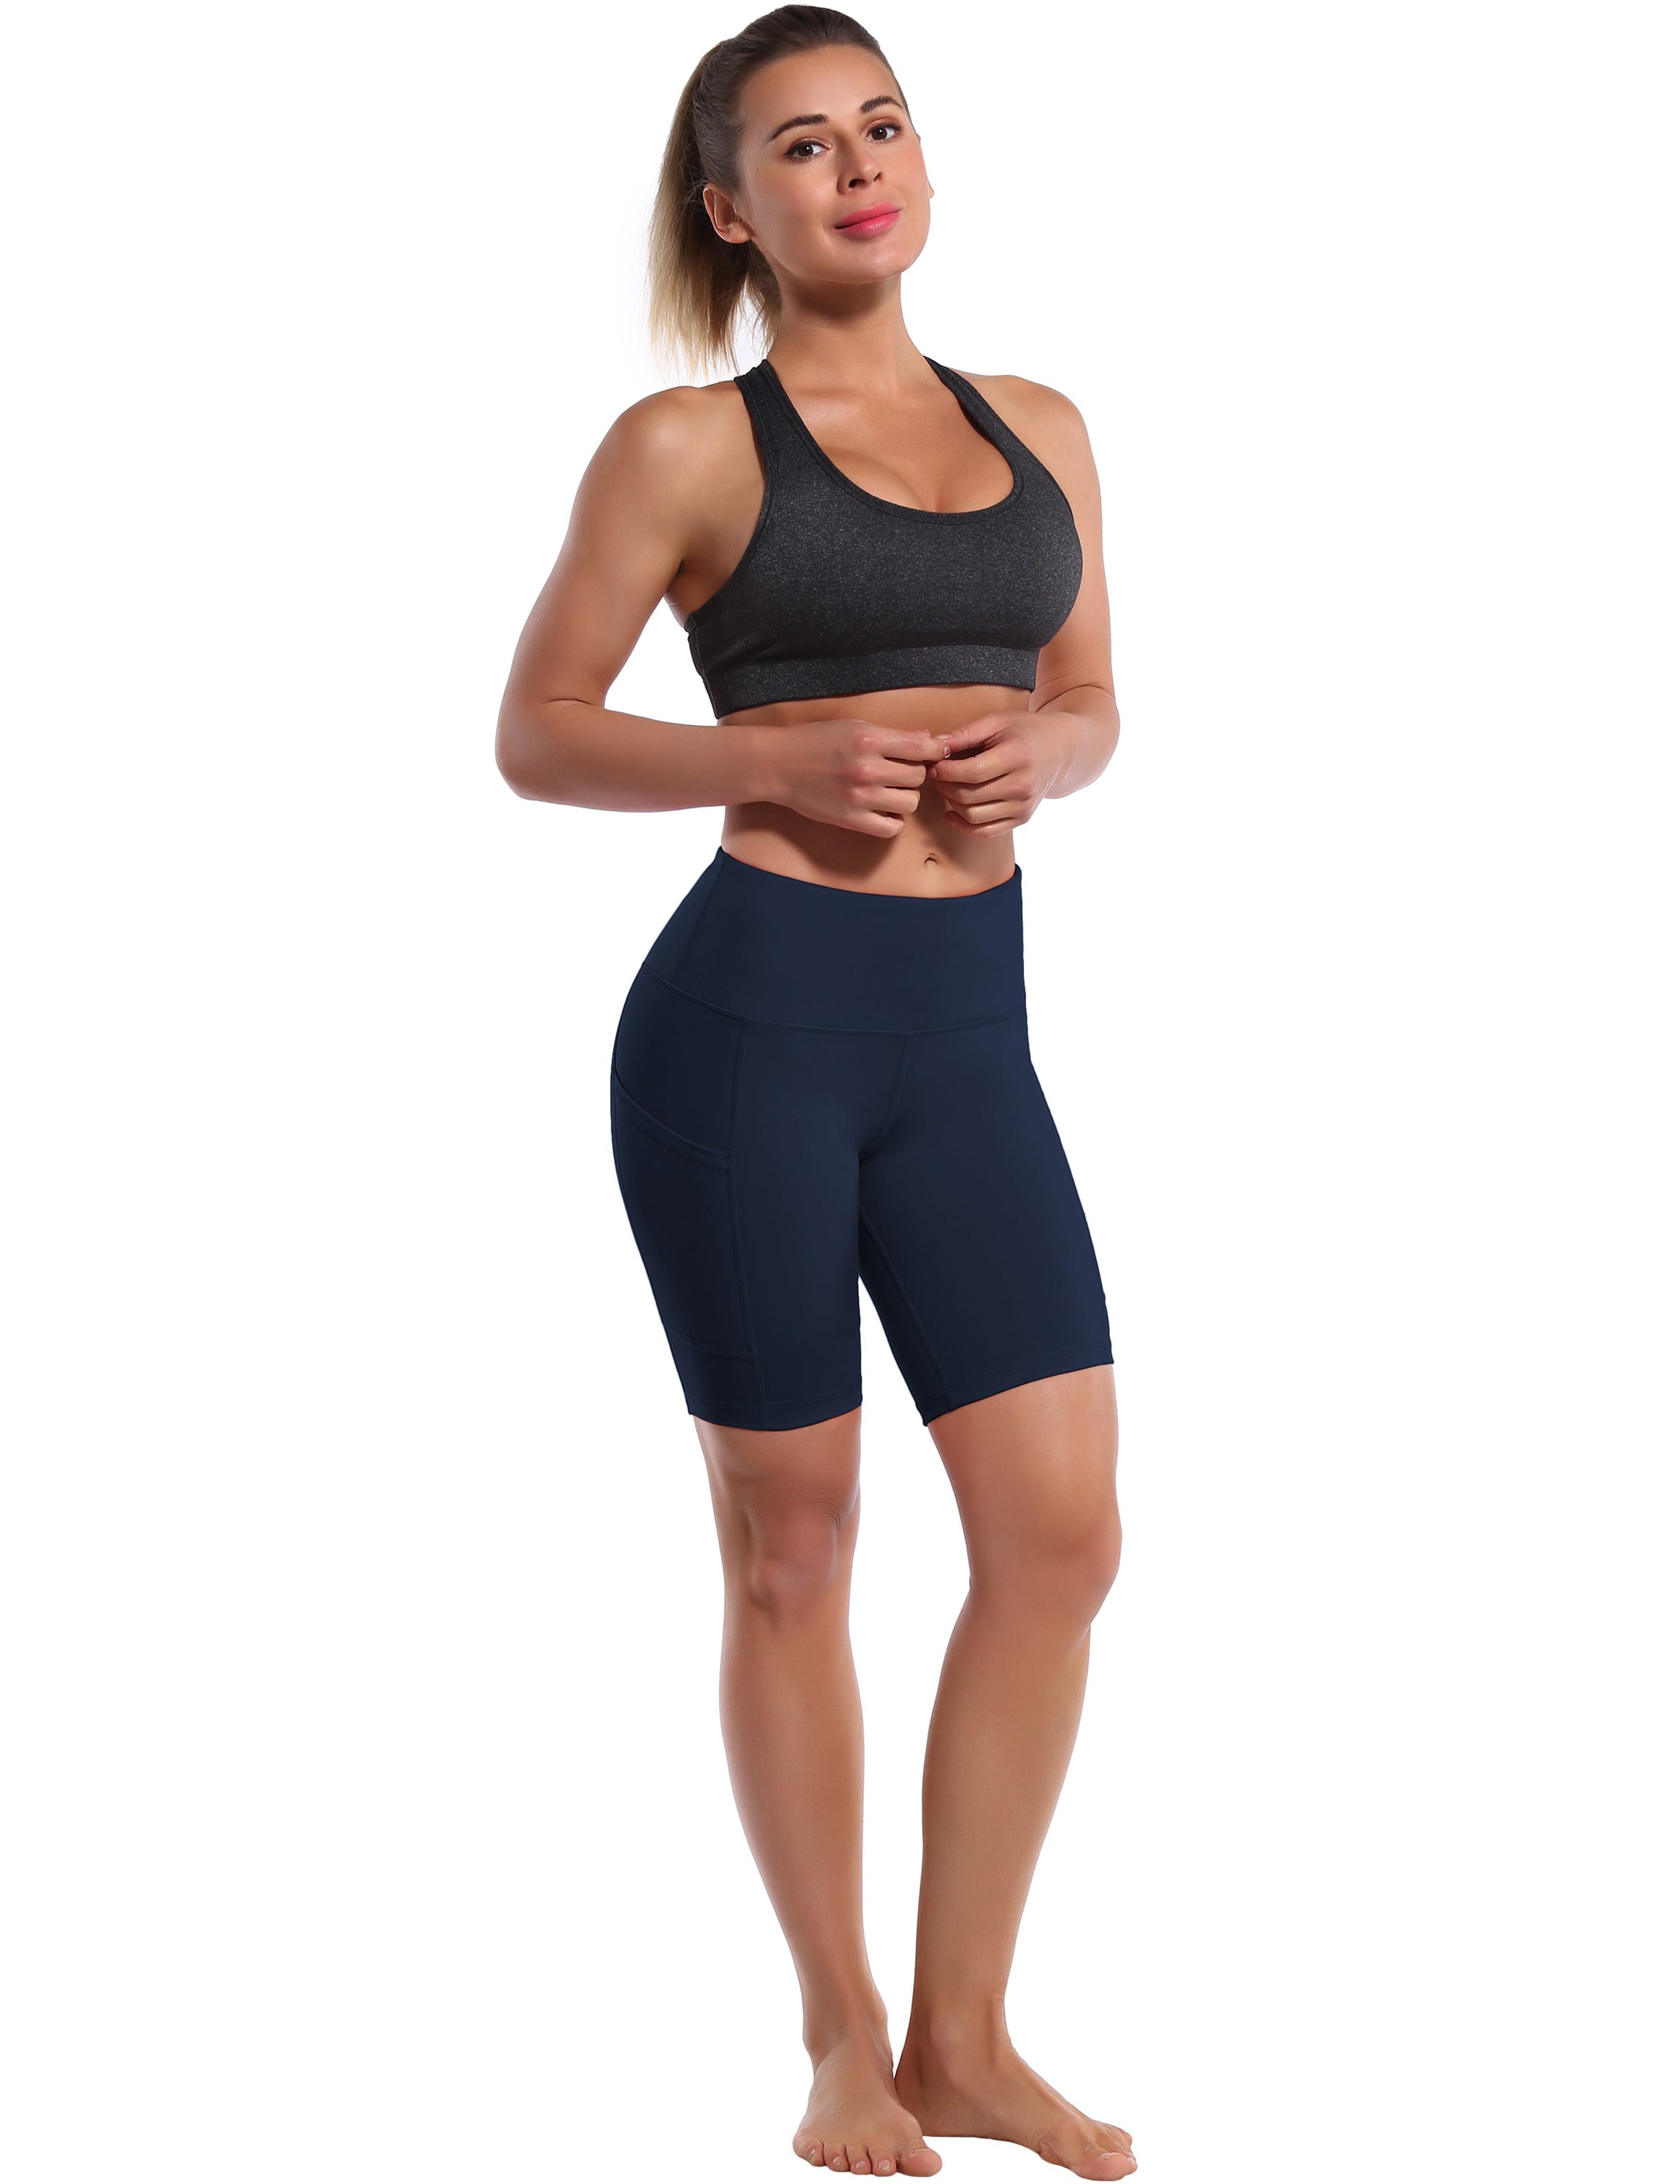 8" Side Pockets Golf Shorts darknavy Sleek, soft, smooth and totally comfortable: our newest style is here. Softest-ever fabric High elasticity High density 4-way stretch Fabric doesn't attract lint easily No see-through Moisture-wicking Machine wash 75% Nylon, 25% Spandex